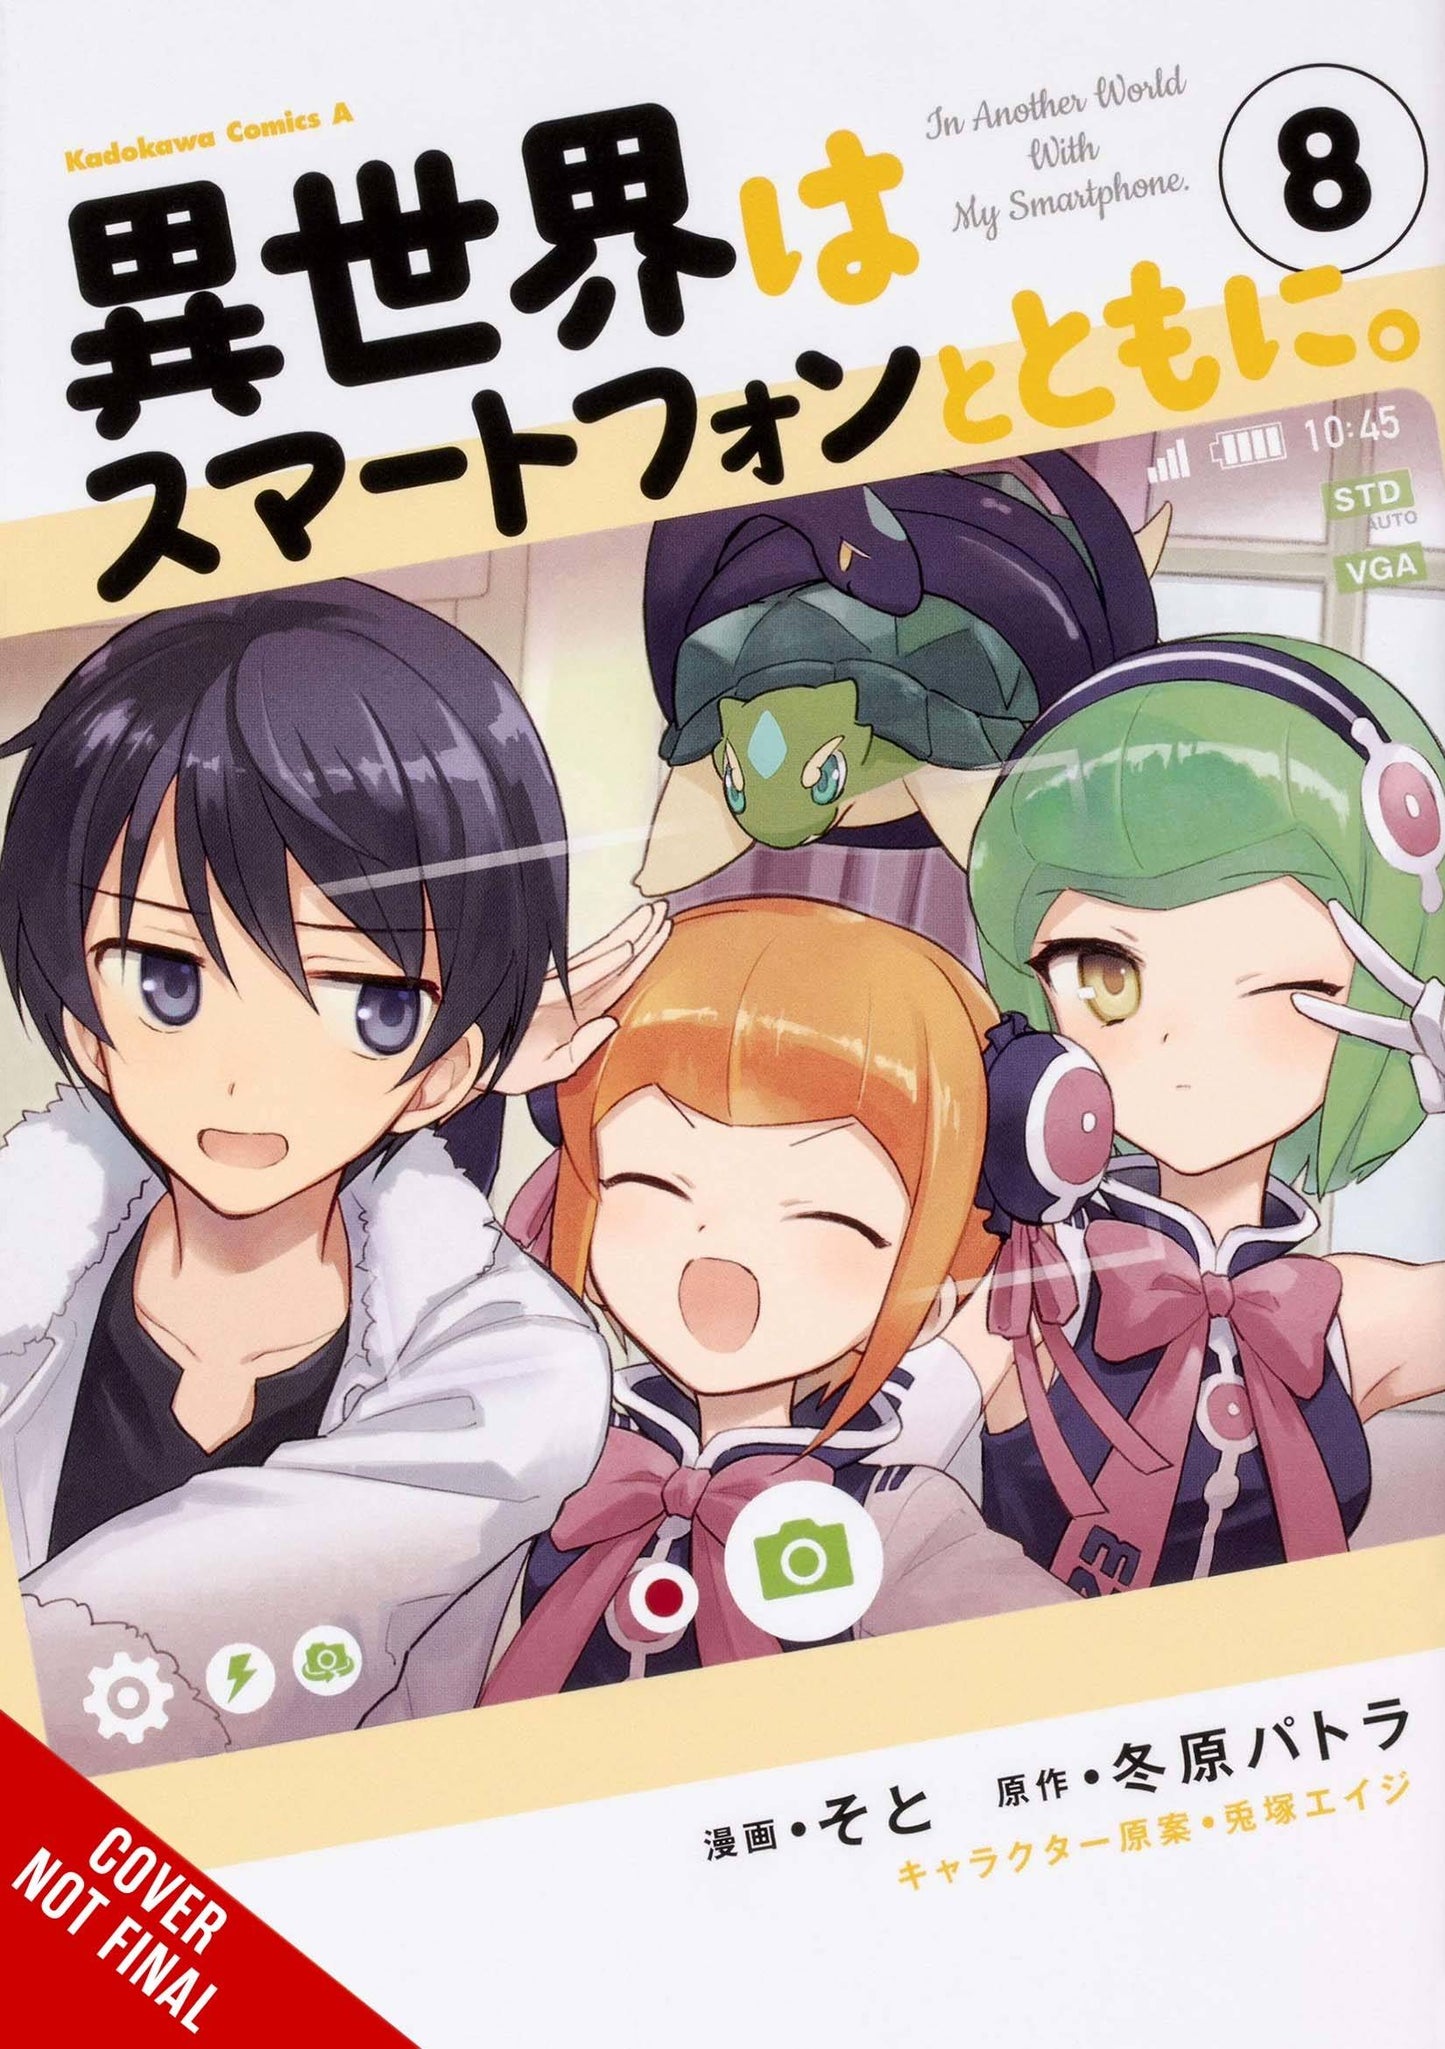 In Another World With My Smartphone Gn Vol 08 (C: 0-1-2) (04/19/2023)